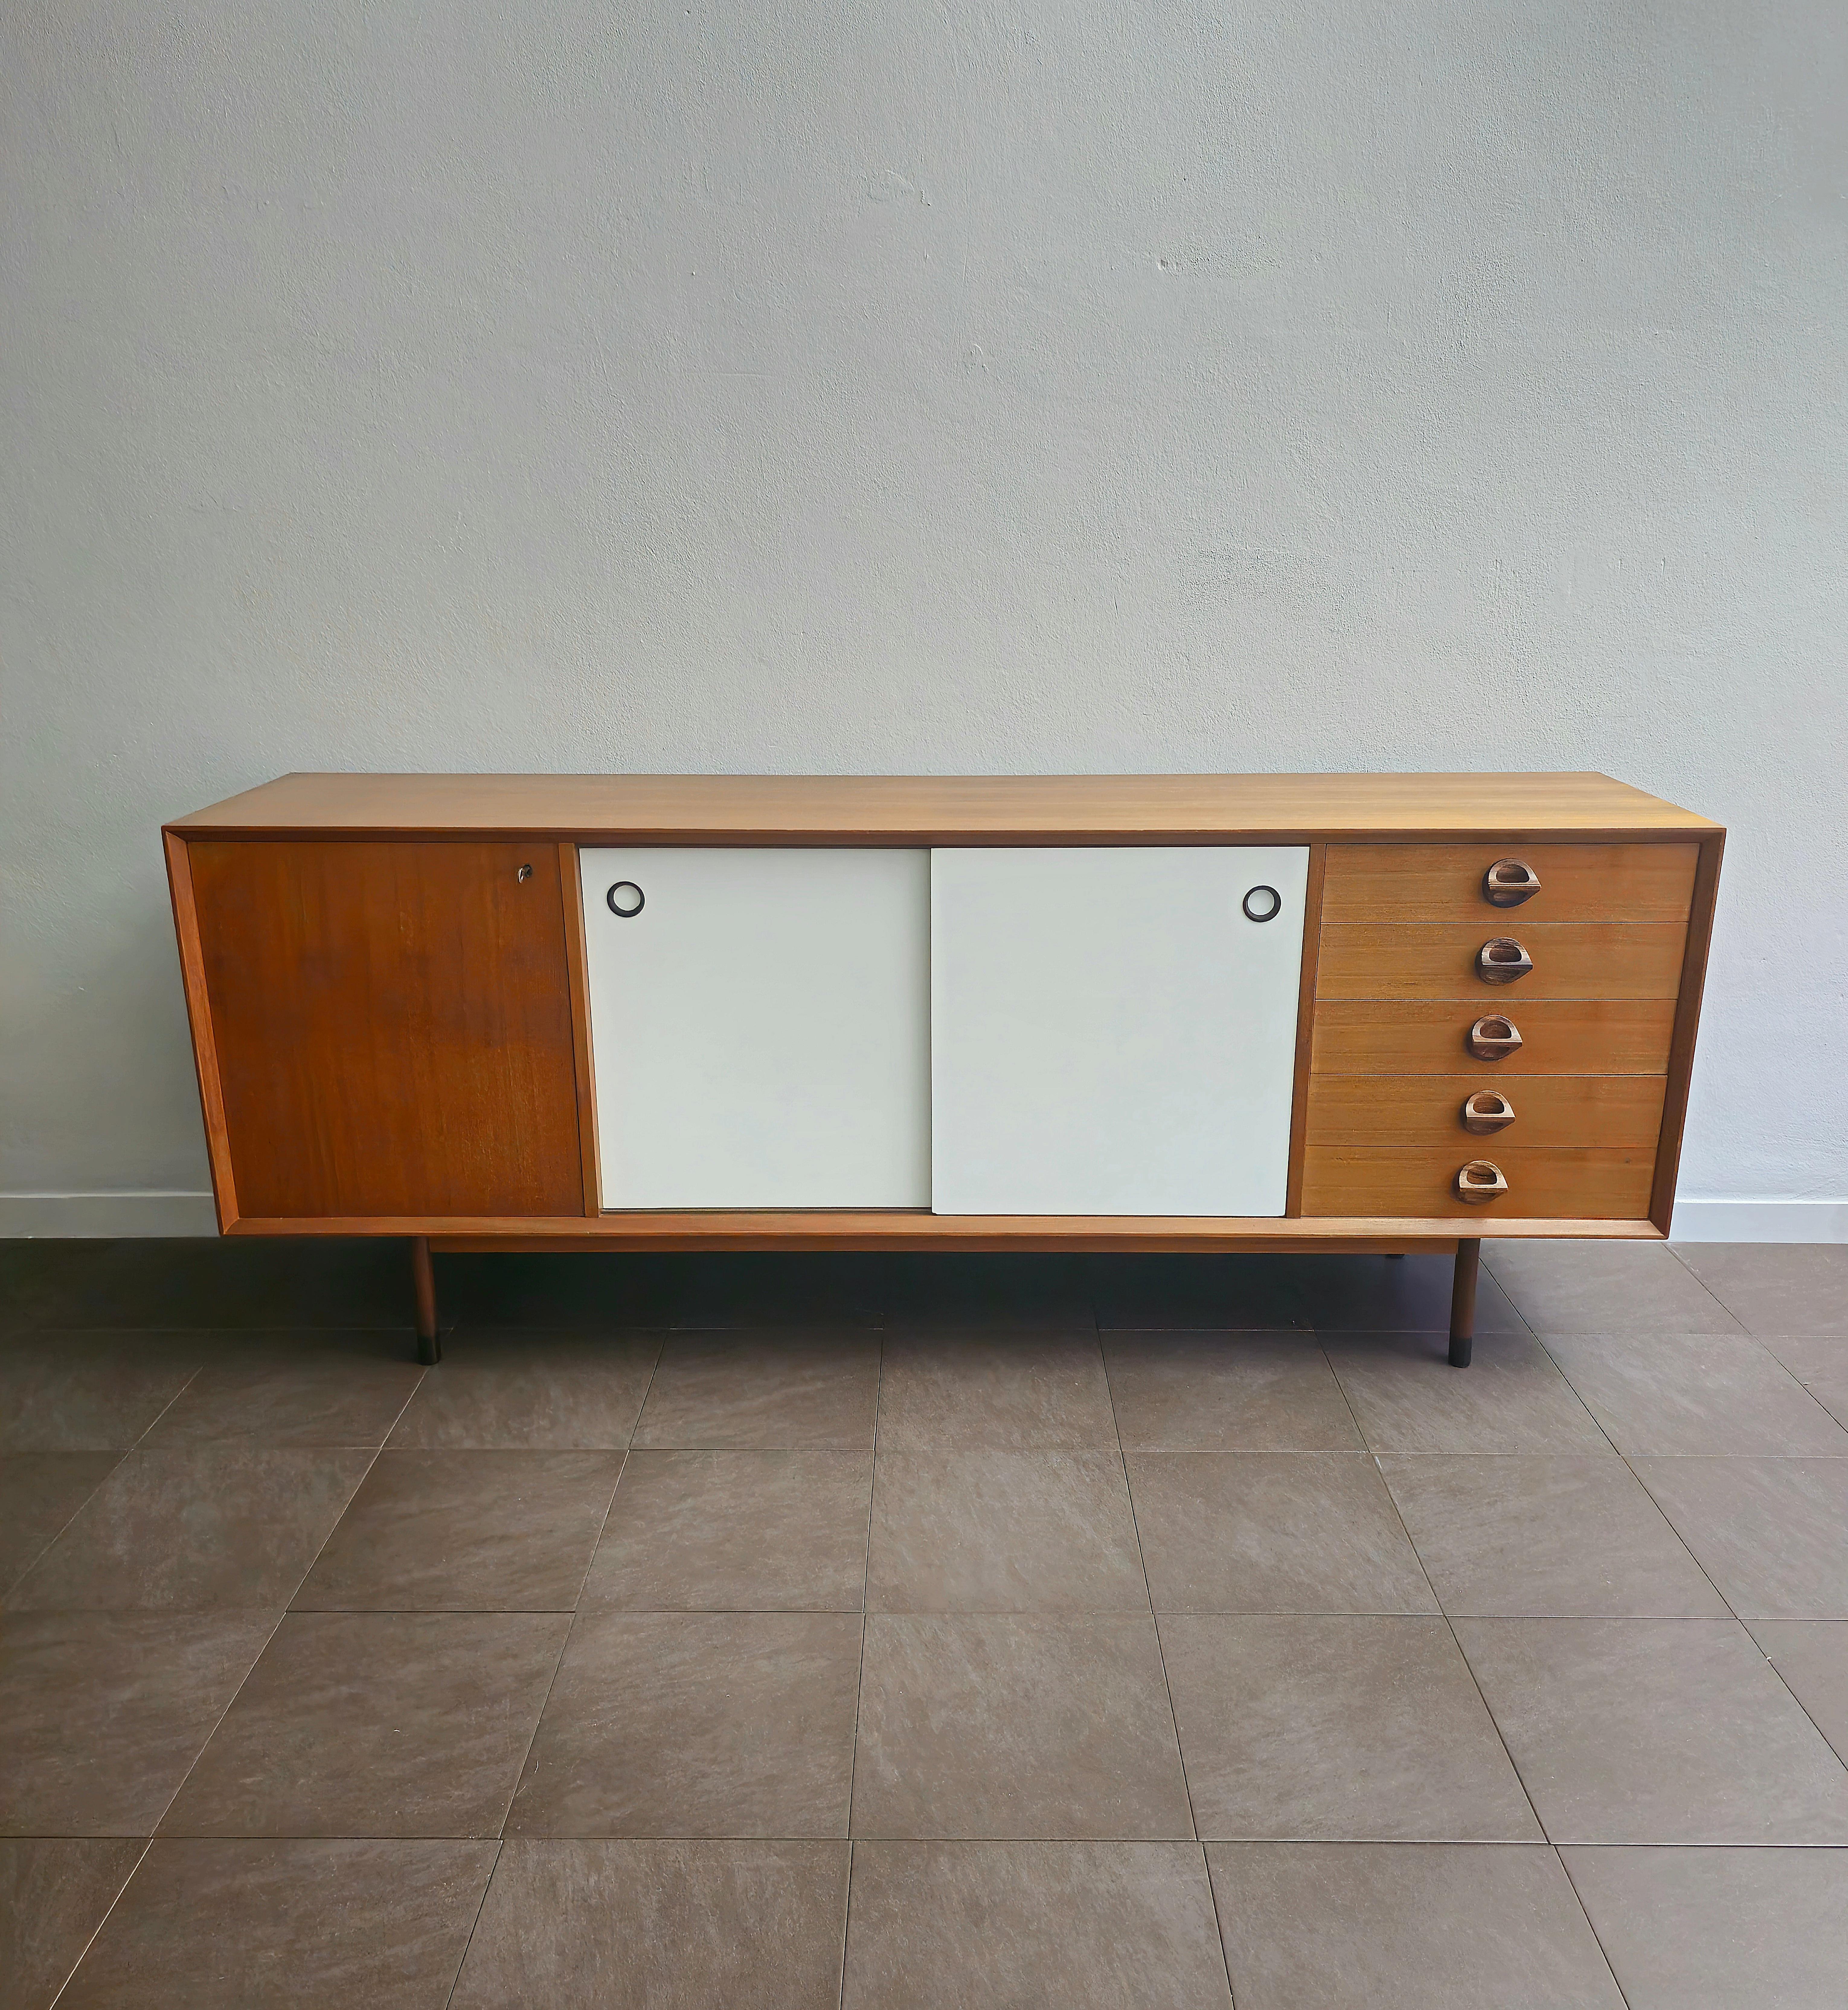 Sideboard of considerable size made of solid wood and teak with a door on the left with a shelf inside, in the center it has 2 sliding doors with the particularity of being reversible, inside we find two more shelves and finally on the right side it